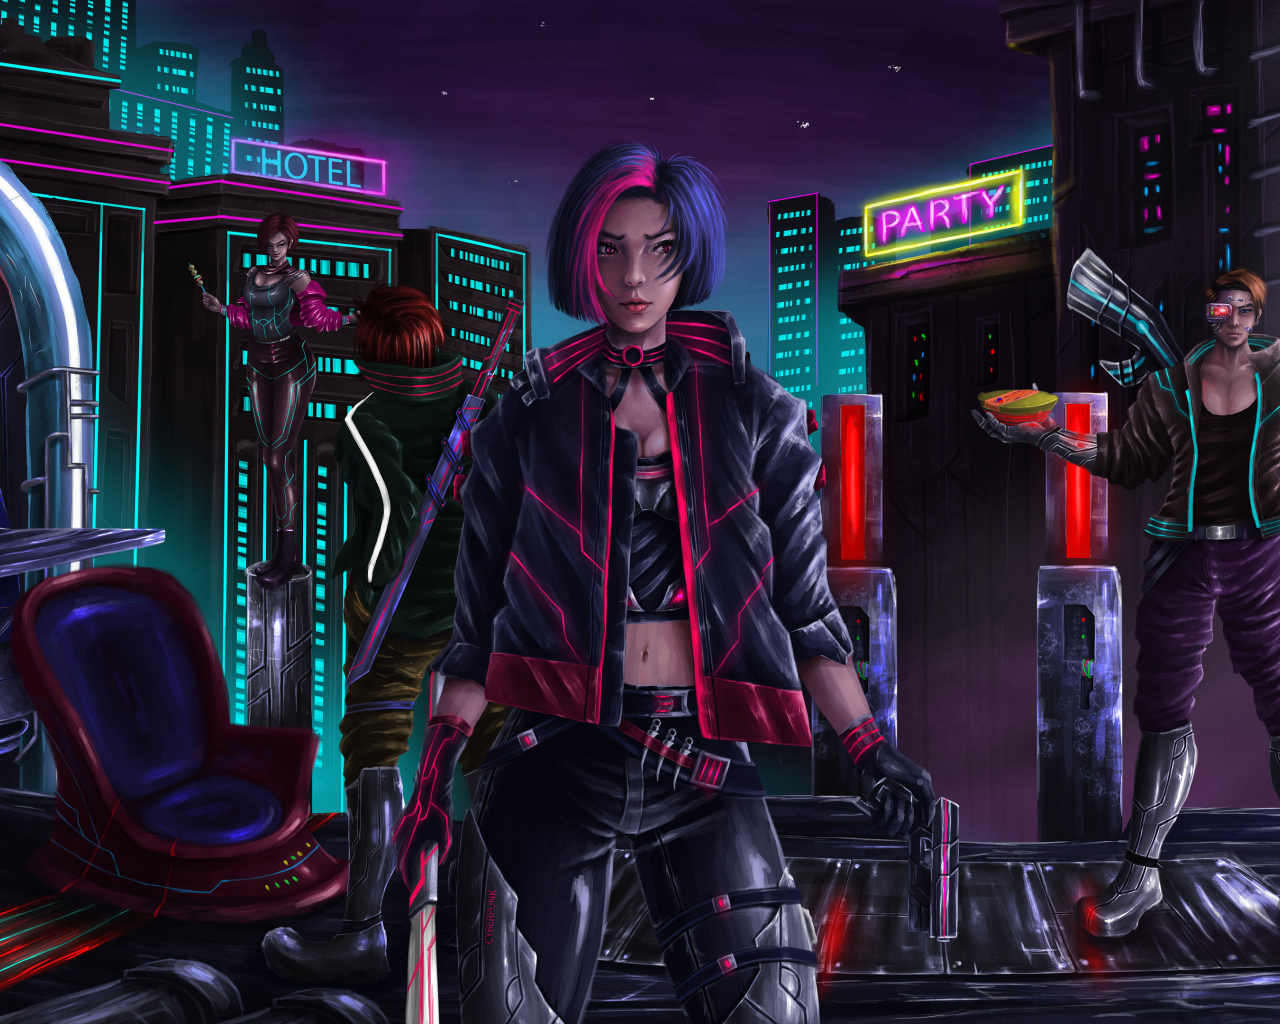 1280x1024 Cyberpunk 4k Gaming 1280x1024 Resolution Wallpaper Hd Games 4k Wallpapers Images Photos And Background Wallpapers Den